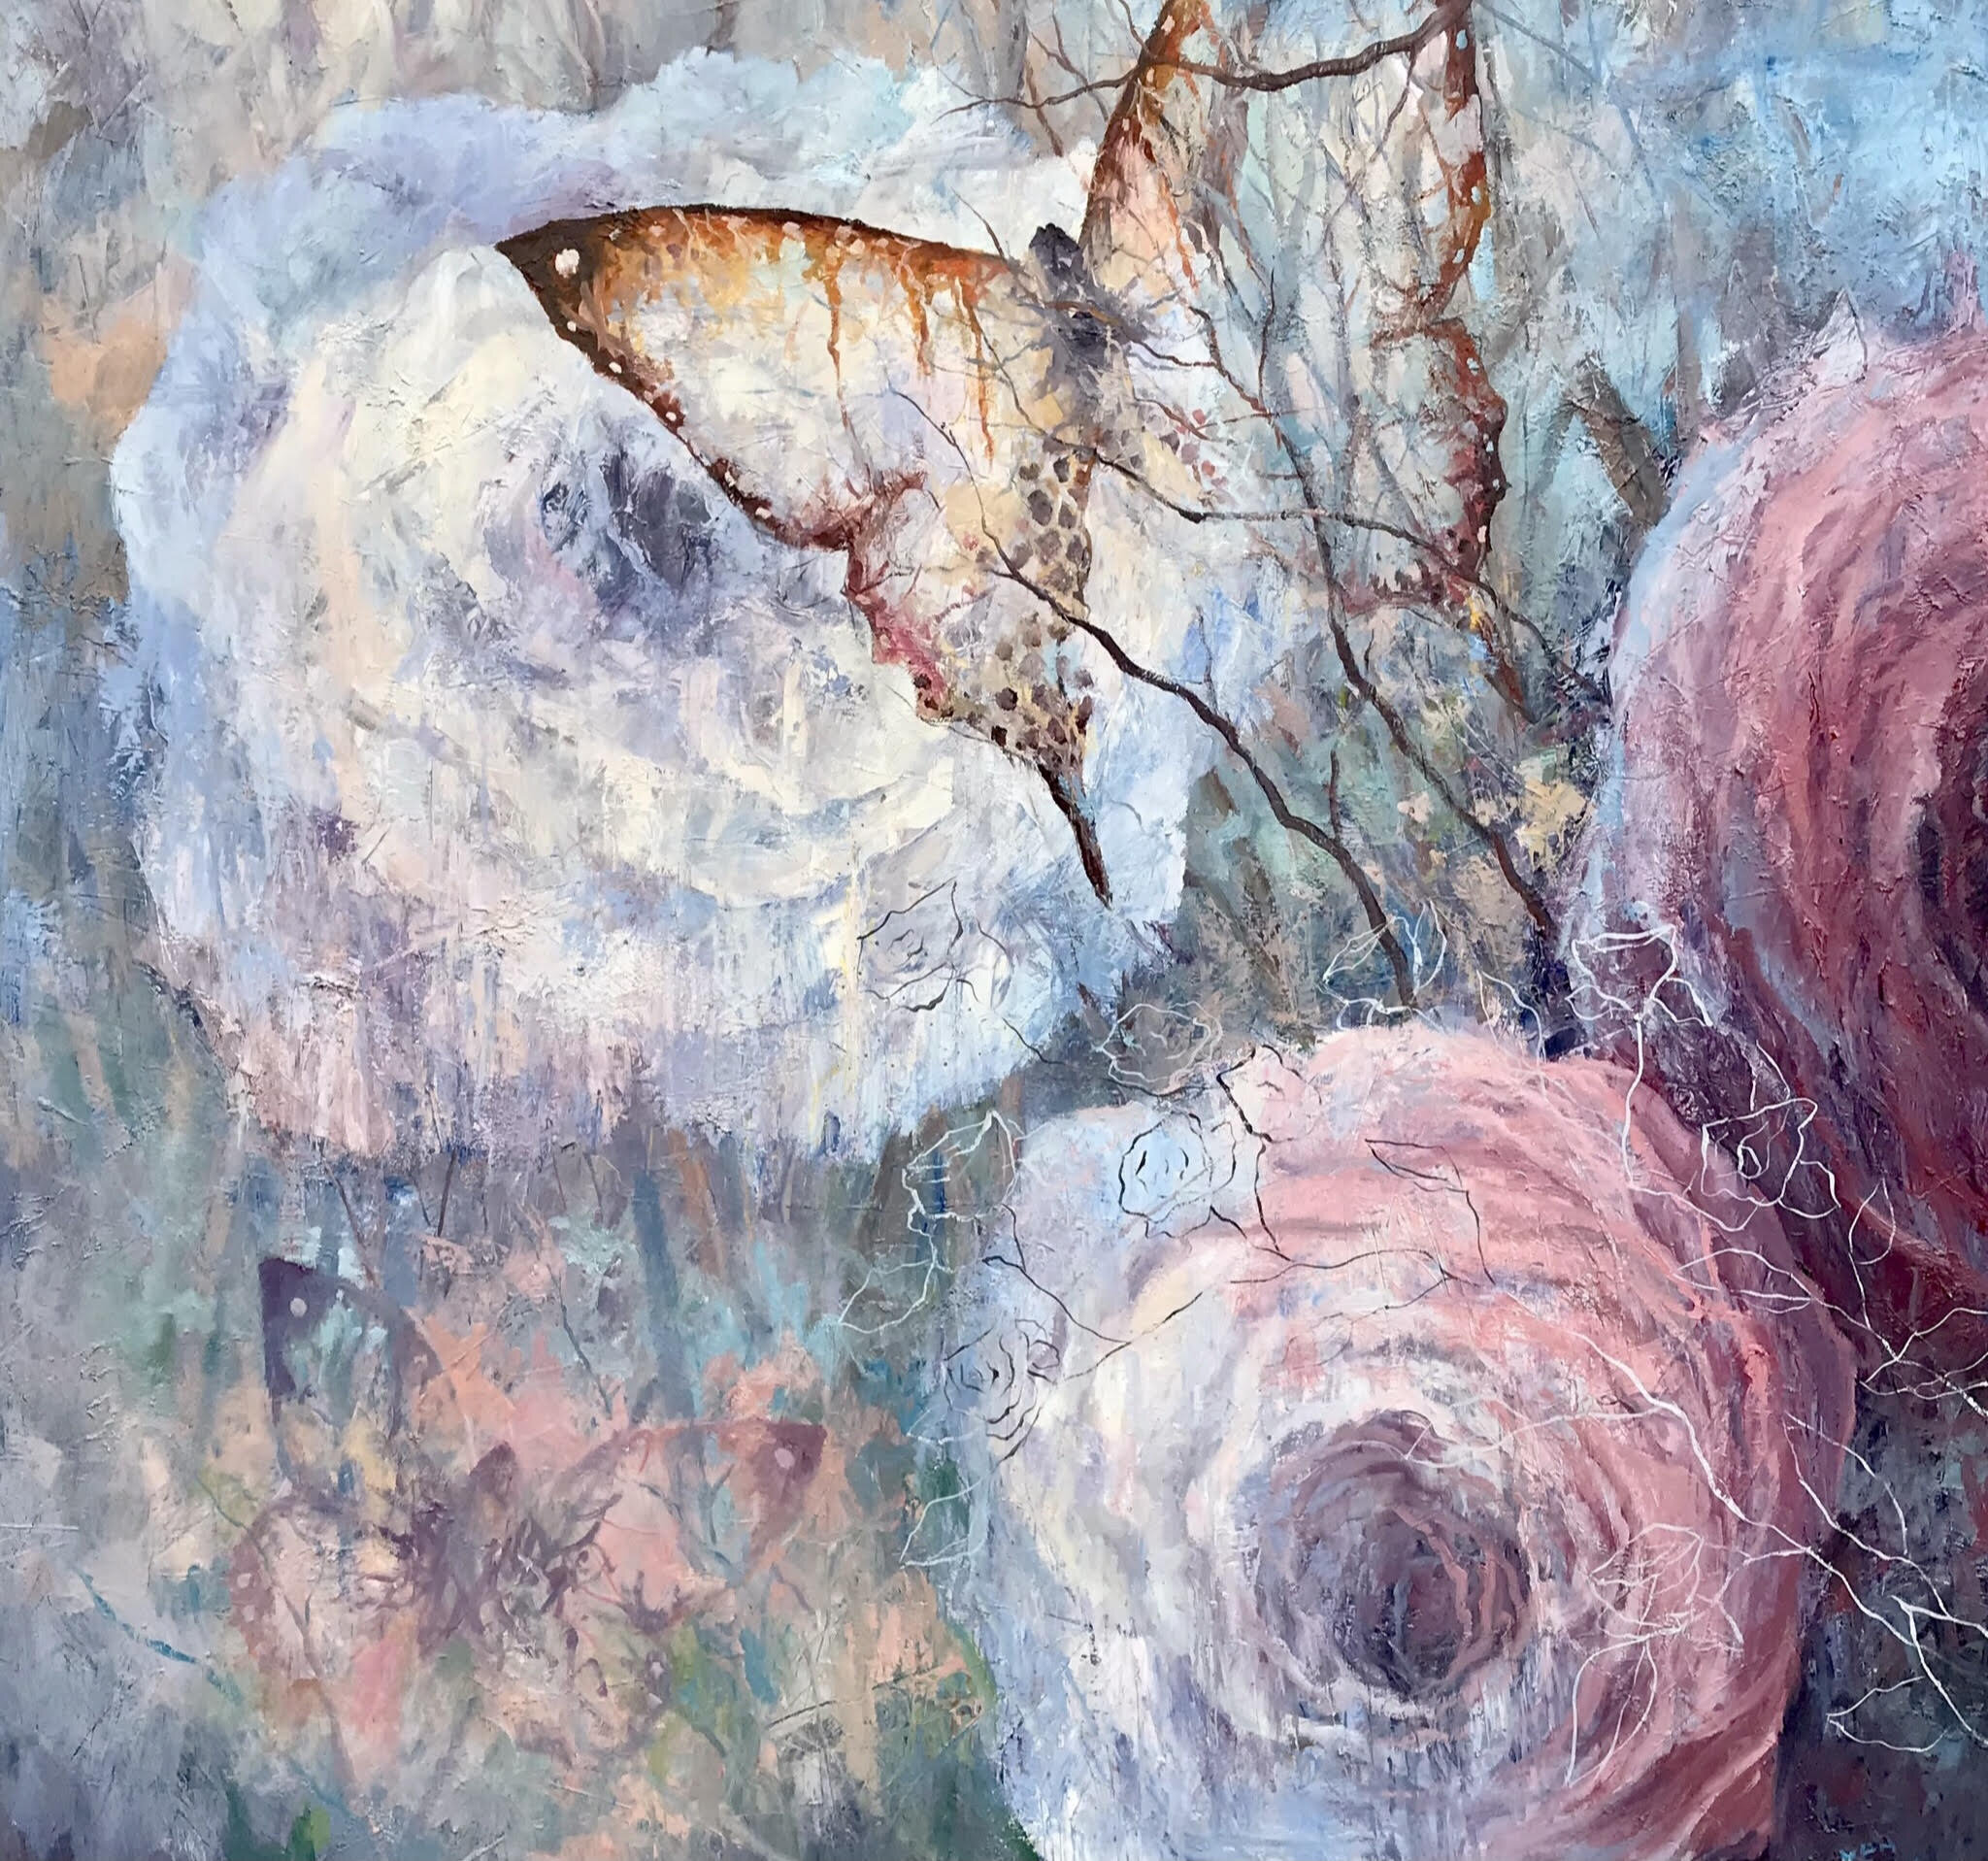 Butterflies and Peonies. Oil on Canvas © 2021 Ken Wallin. All Rights Reserved.